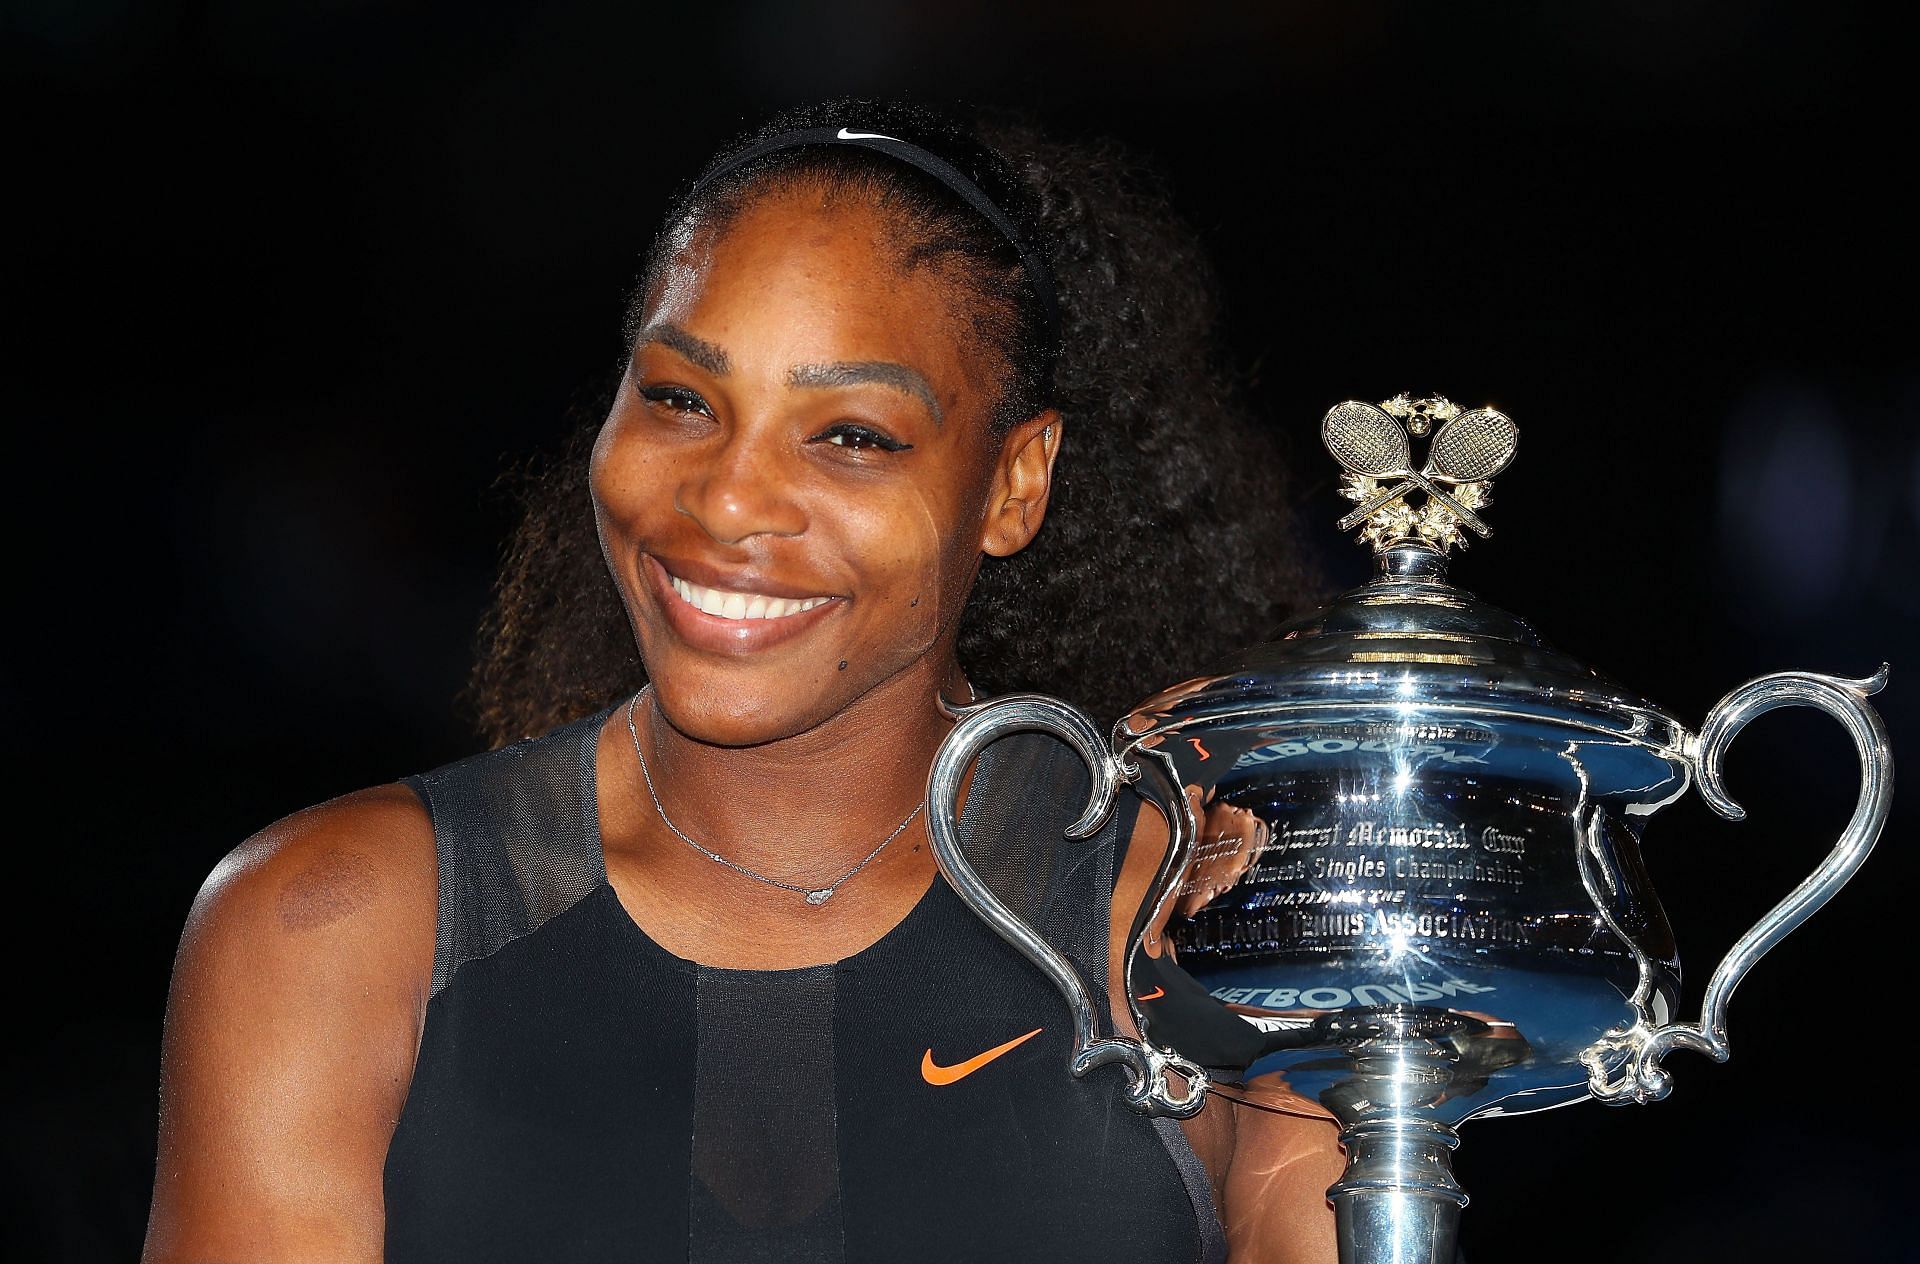 Serena Williams poses with the 2017 Australian Open